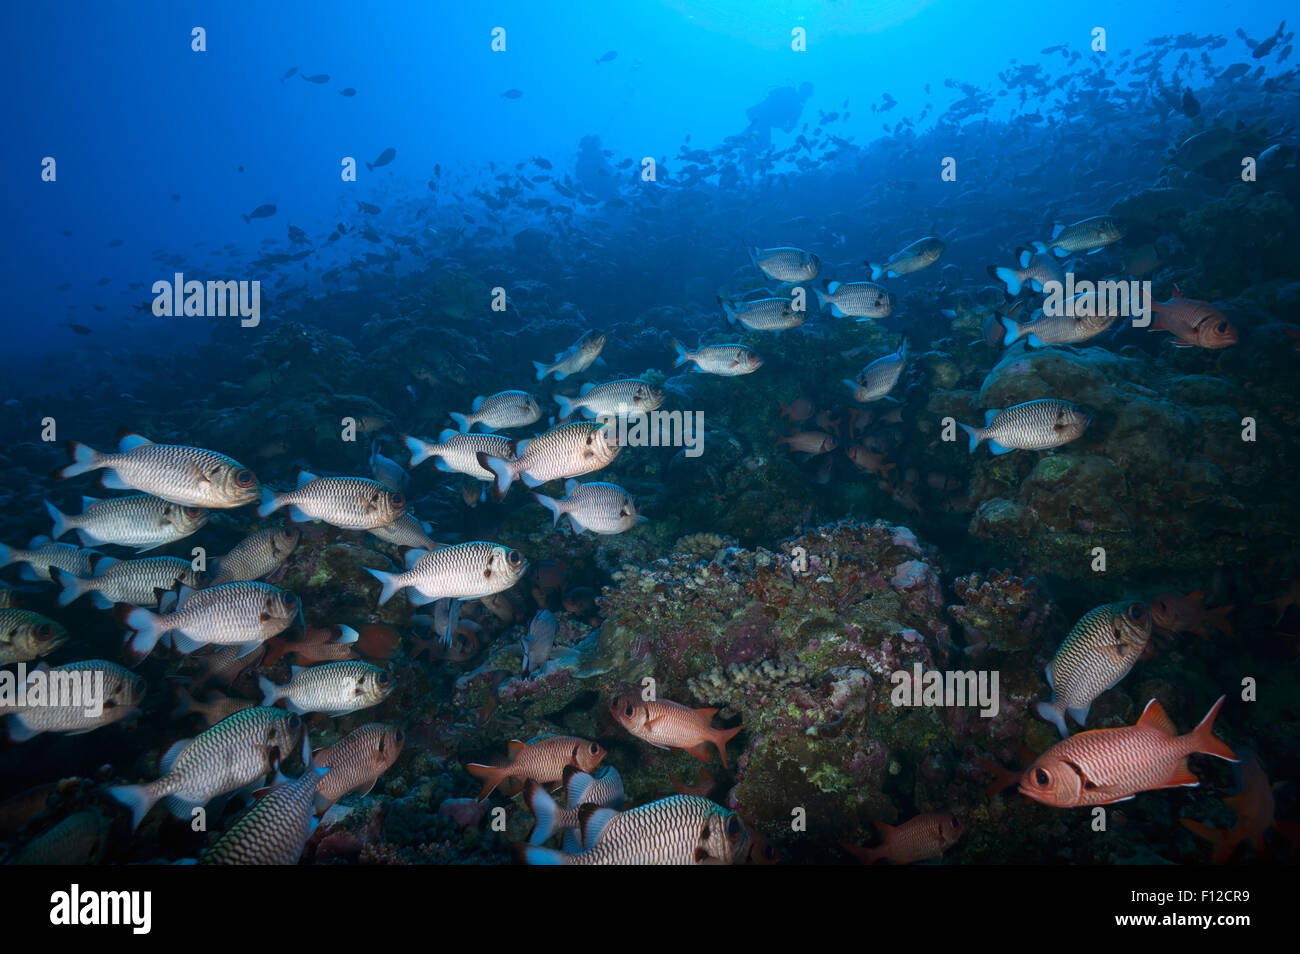 BIG SCHOOL OF SOLDIERFISH SWIMMING CLOSE TO CORAL REEF Stock Photo